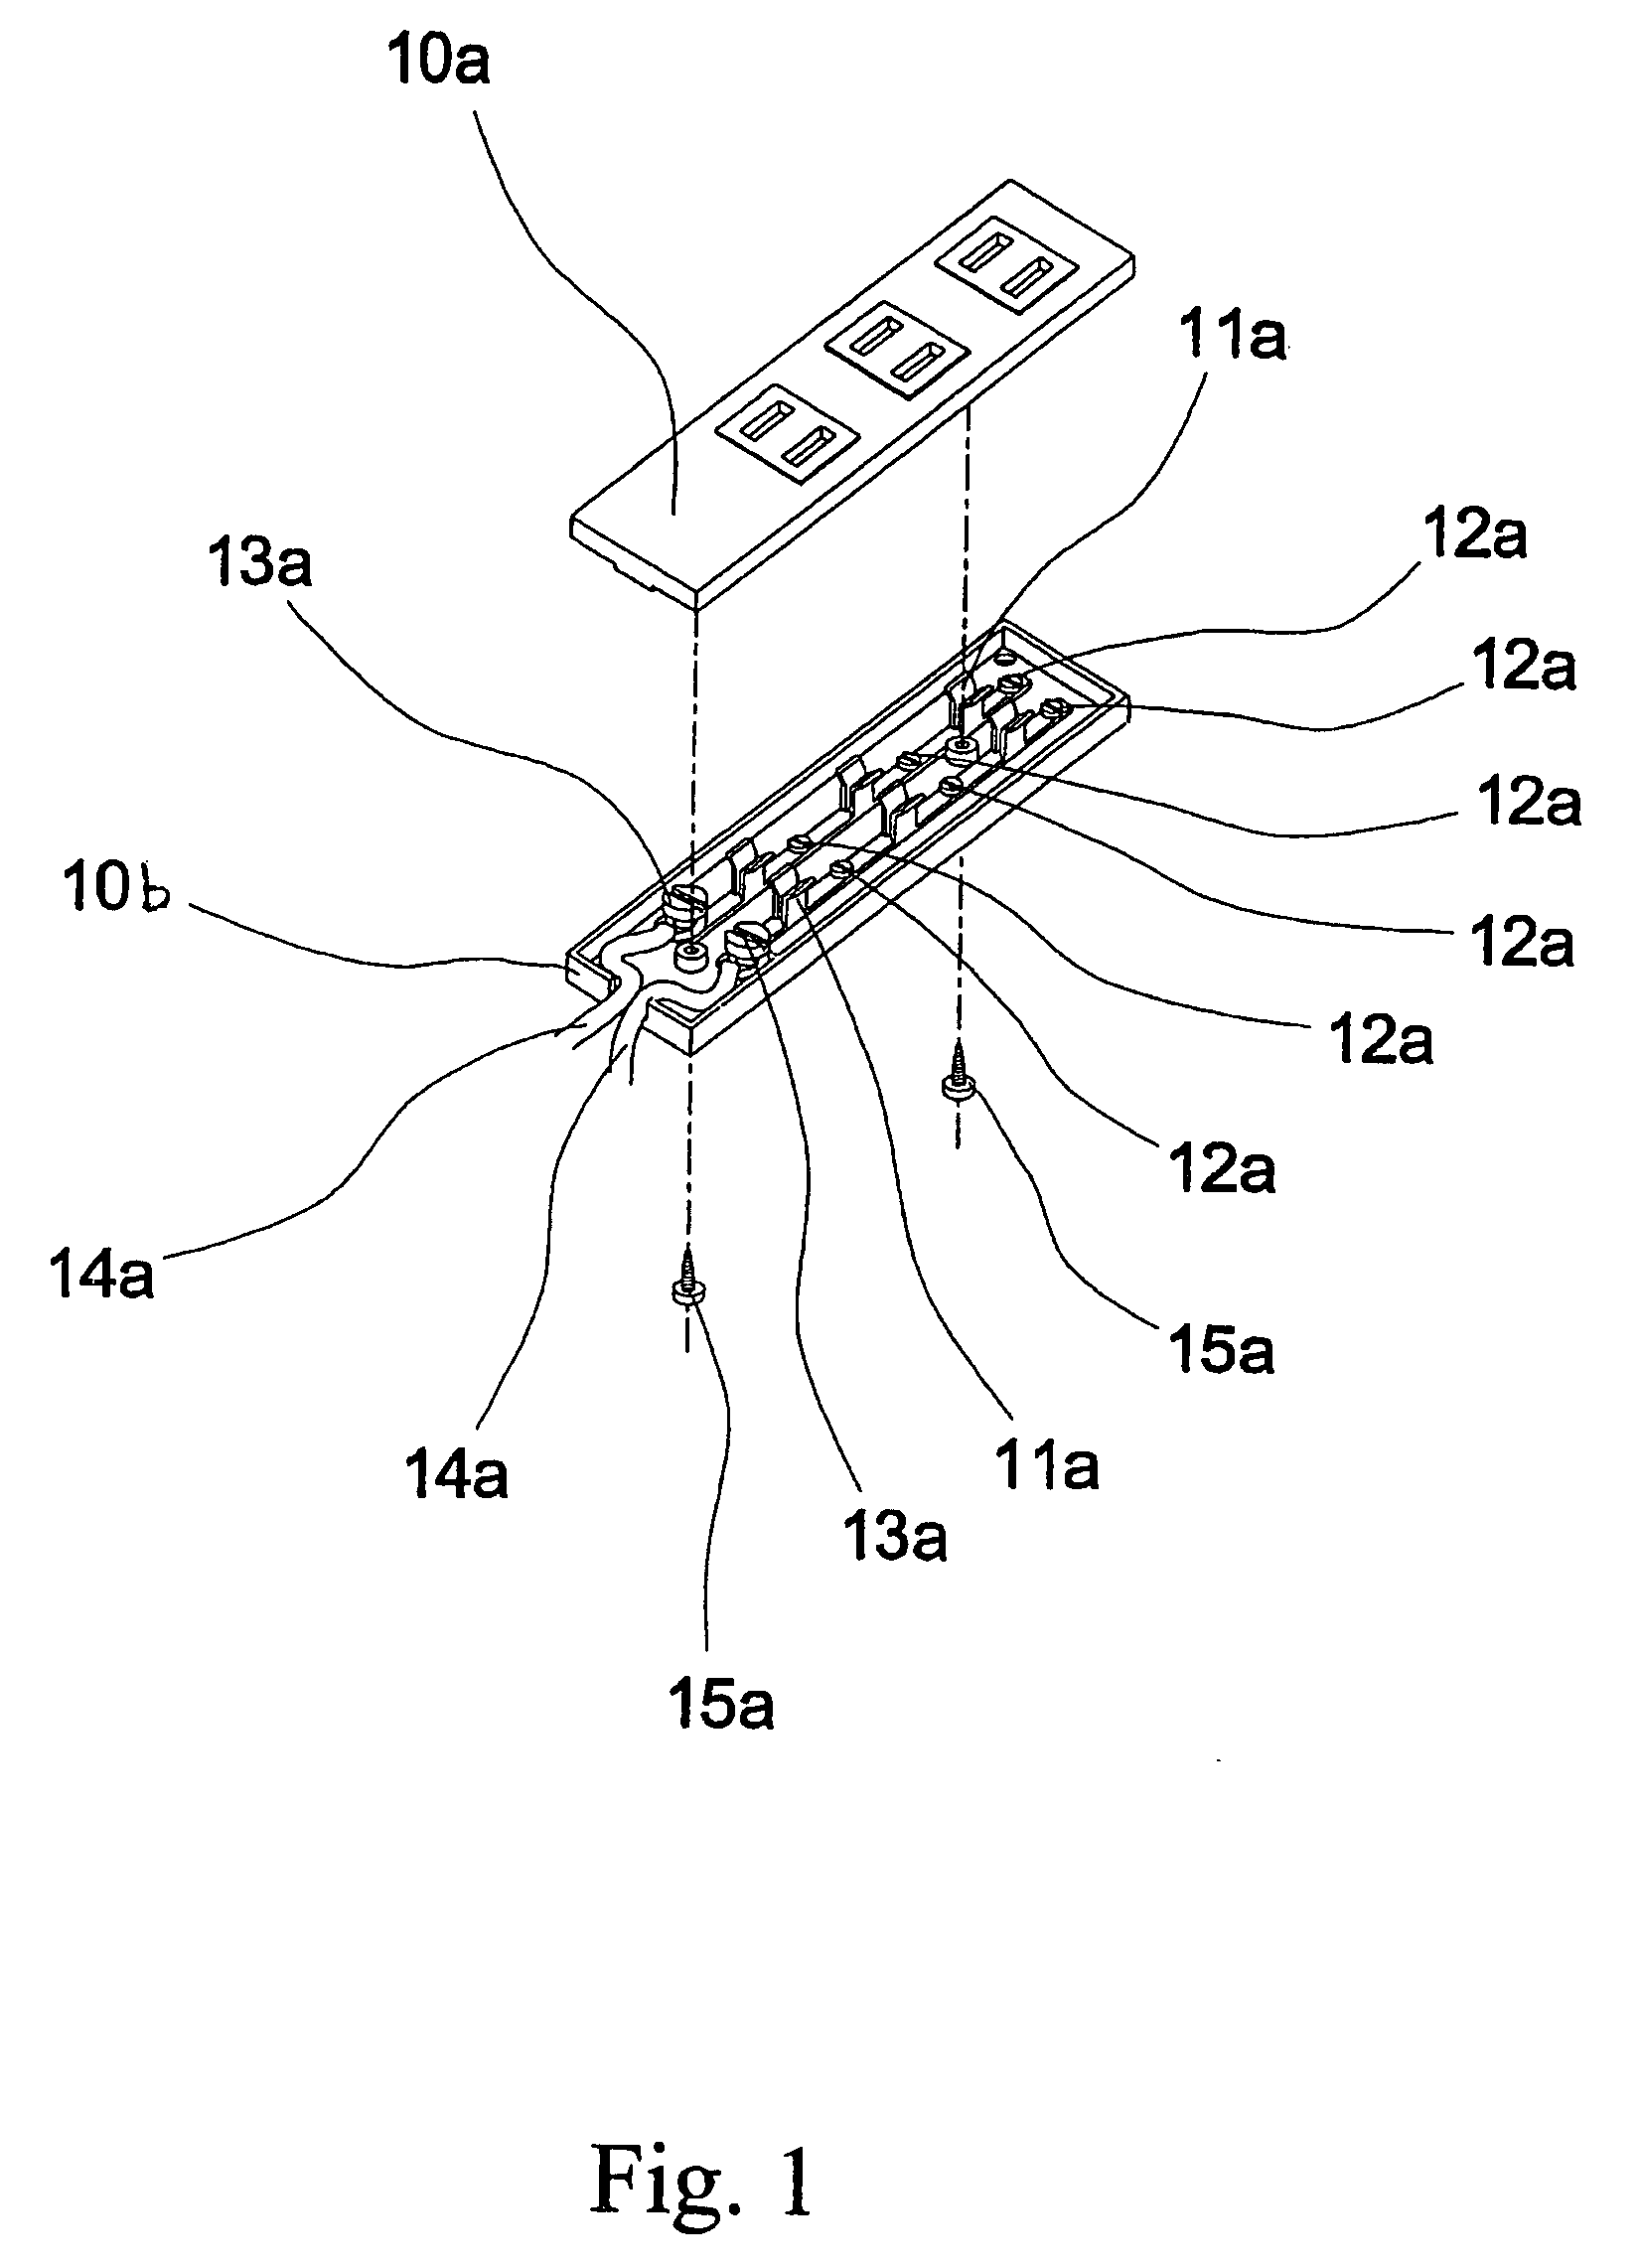 Over-current actuated reed relay and electrical outlet incorporating the same for providing over-current alarm